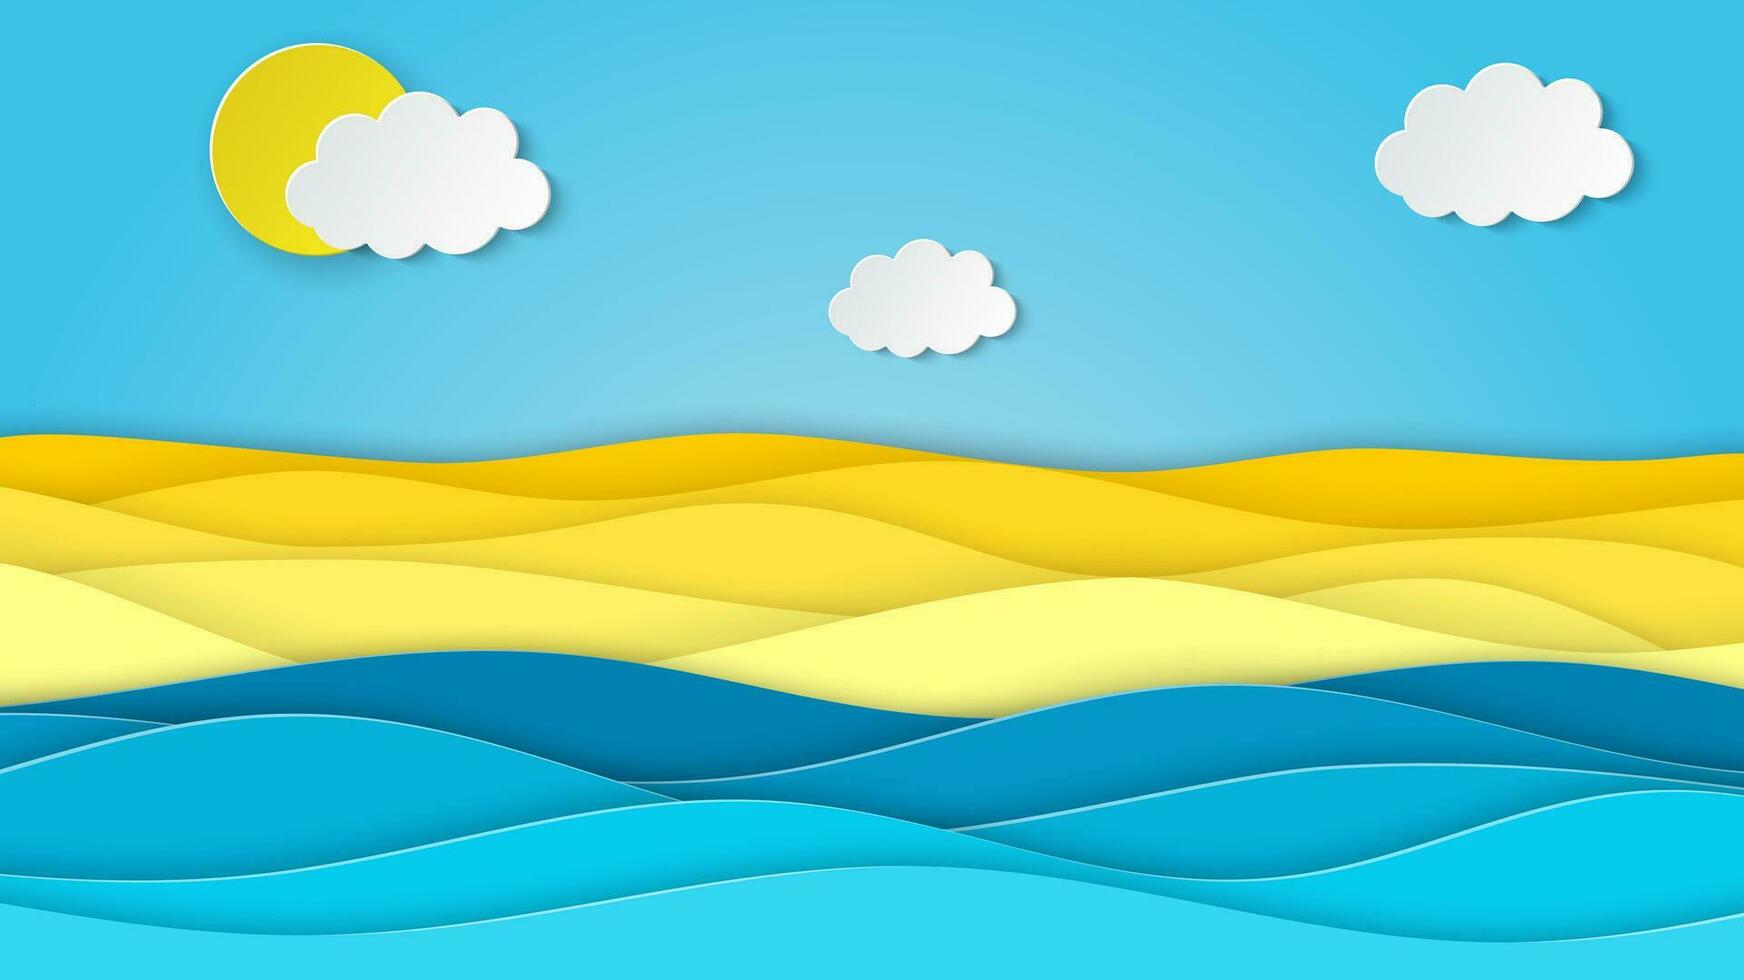 Sea landscape with beach, waves, clouds. Paper cut out digital craft style. abstract blue sea and beach summer background with paper waves and seacoast. Vector illustration